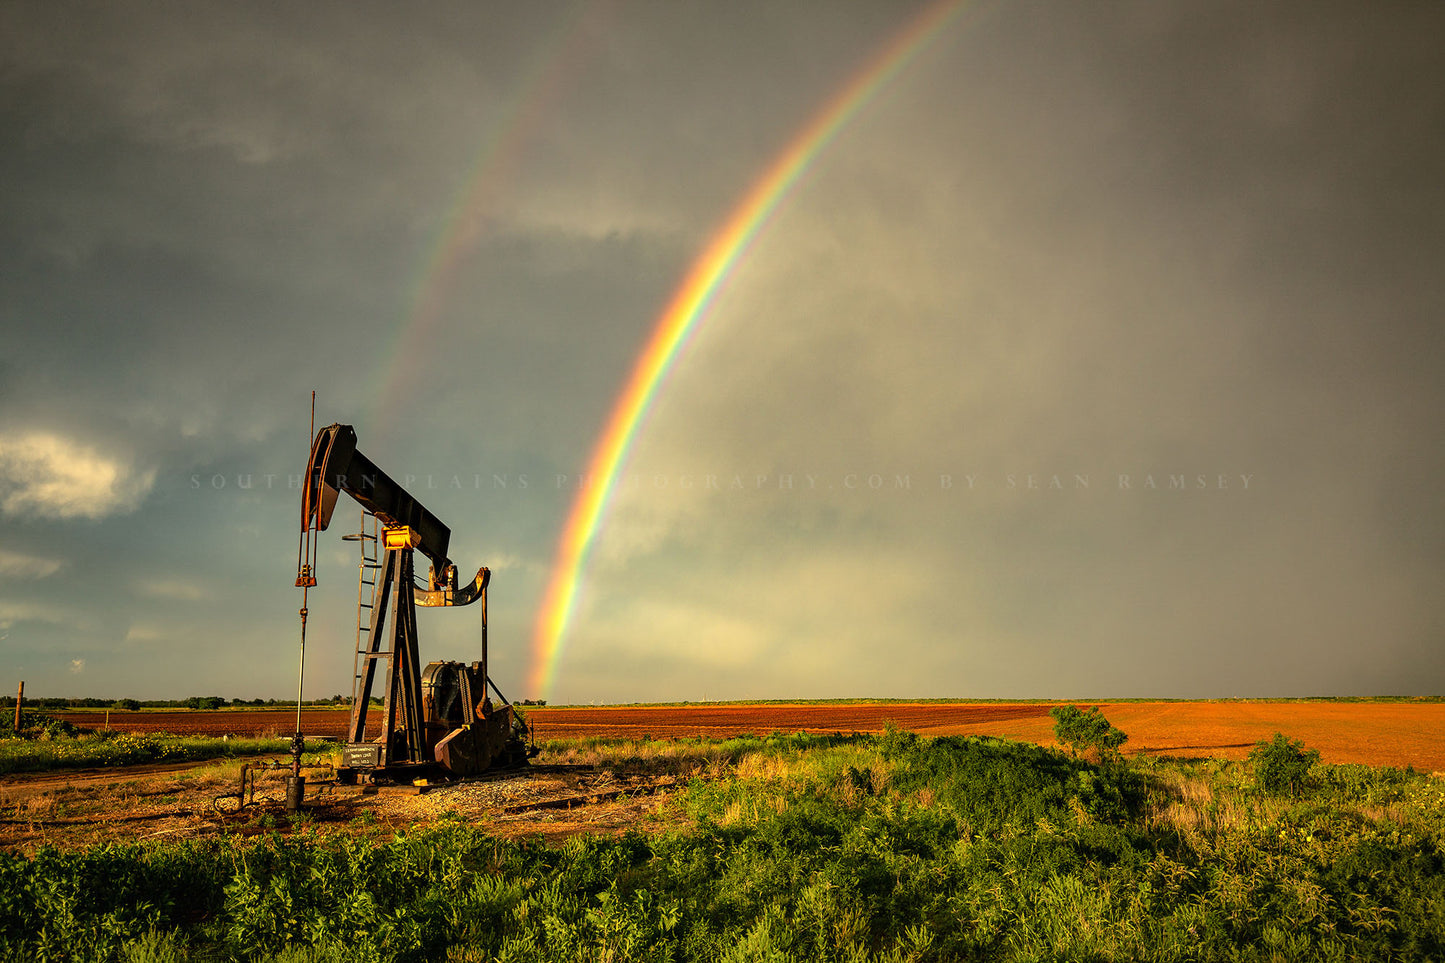 Oilfield photography print of a vibrant rainbow ending at a pump jack after a stormy day on the plains of Texas by Sean Ramsey of Southern Plains Photography.